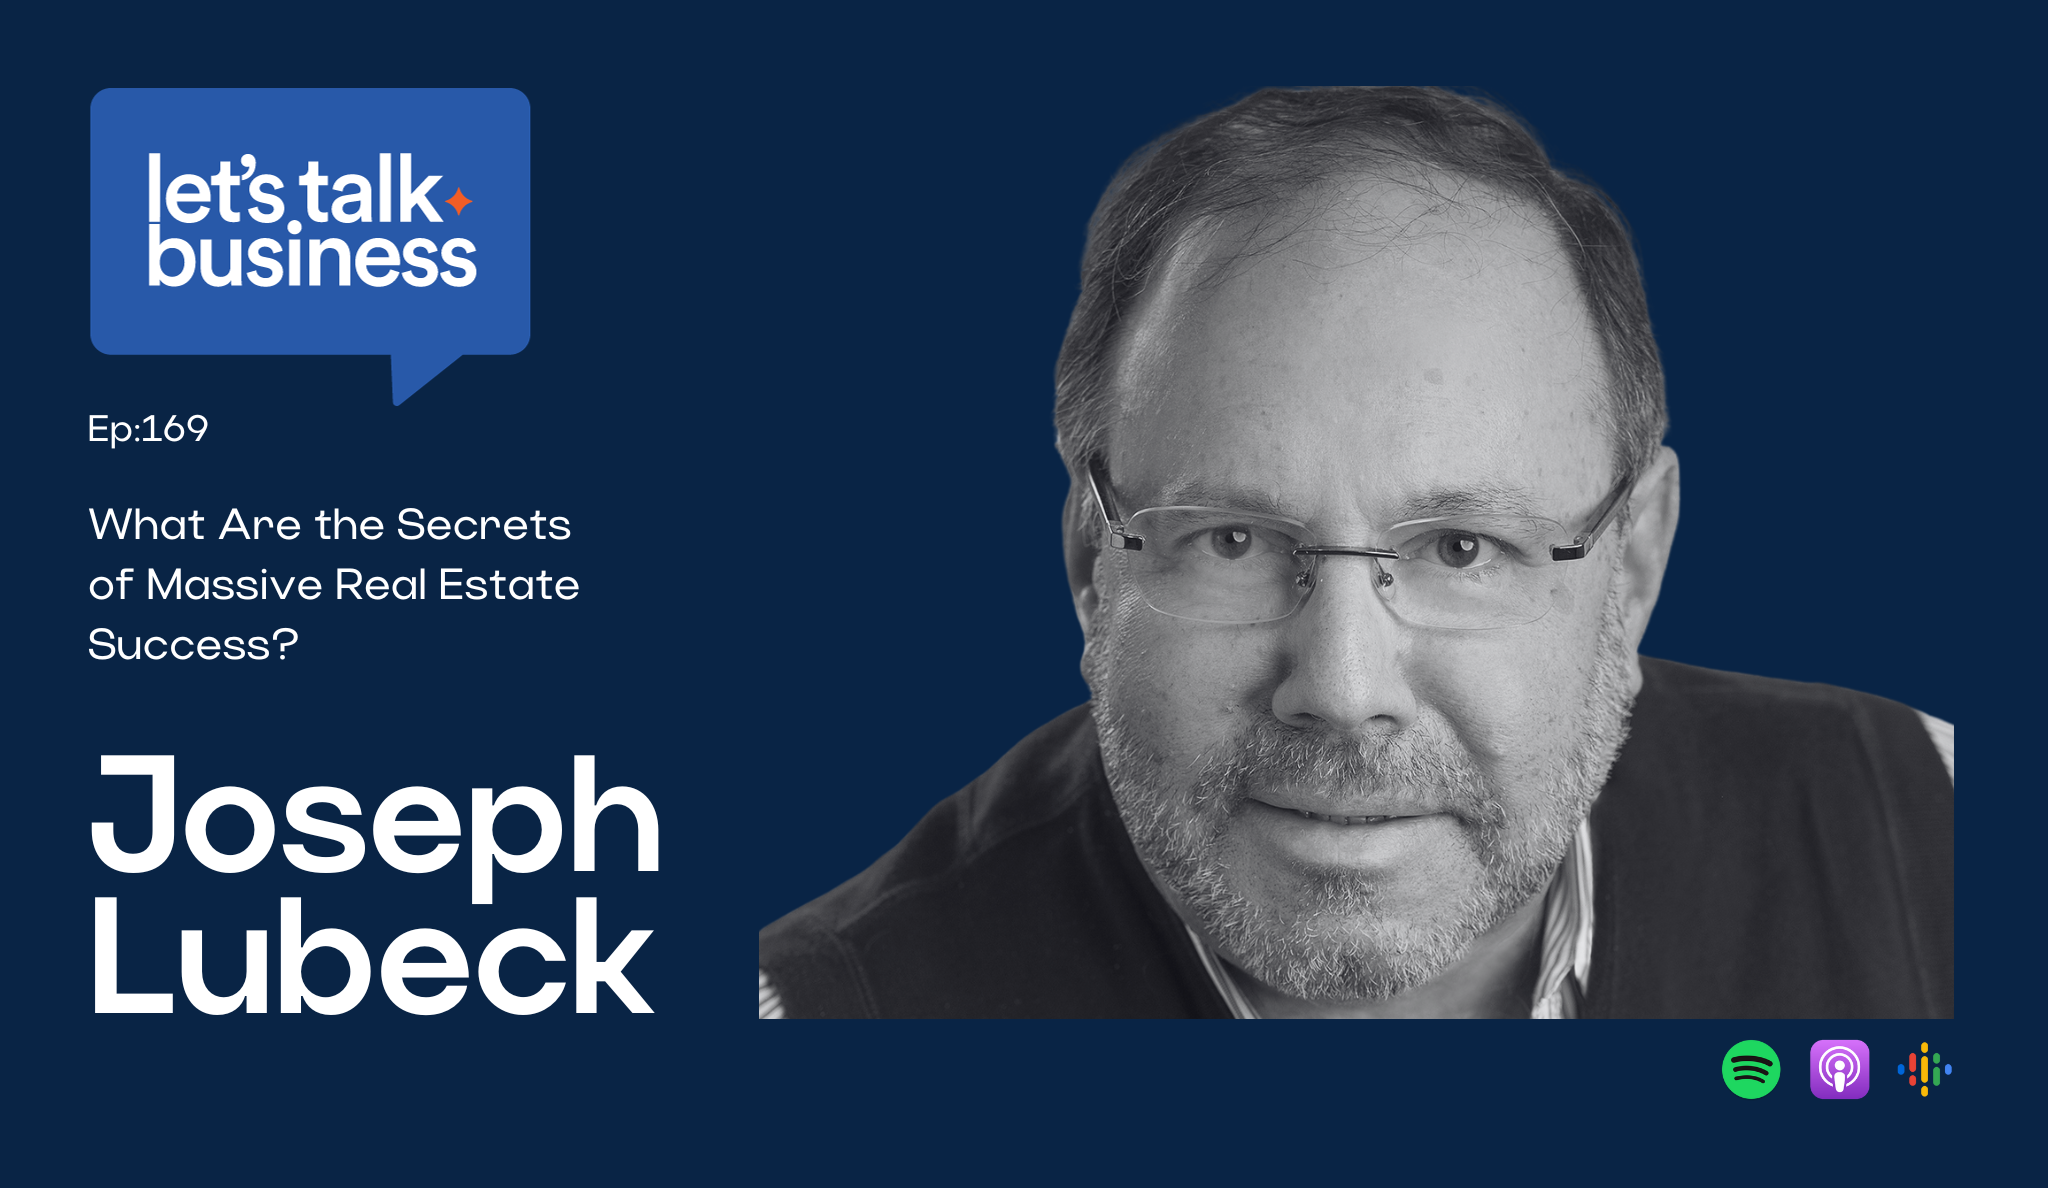 What Are the Secrets of Massive Real Estate Success? A Conversation with Joseph Lubeck